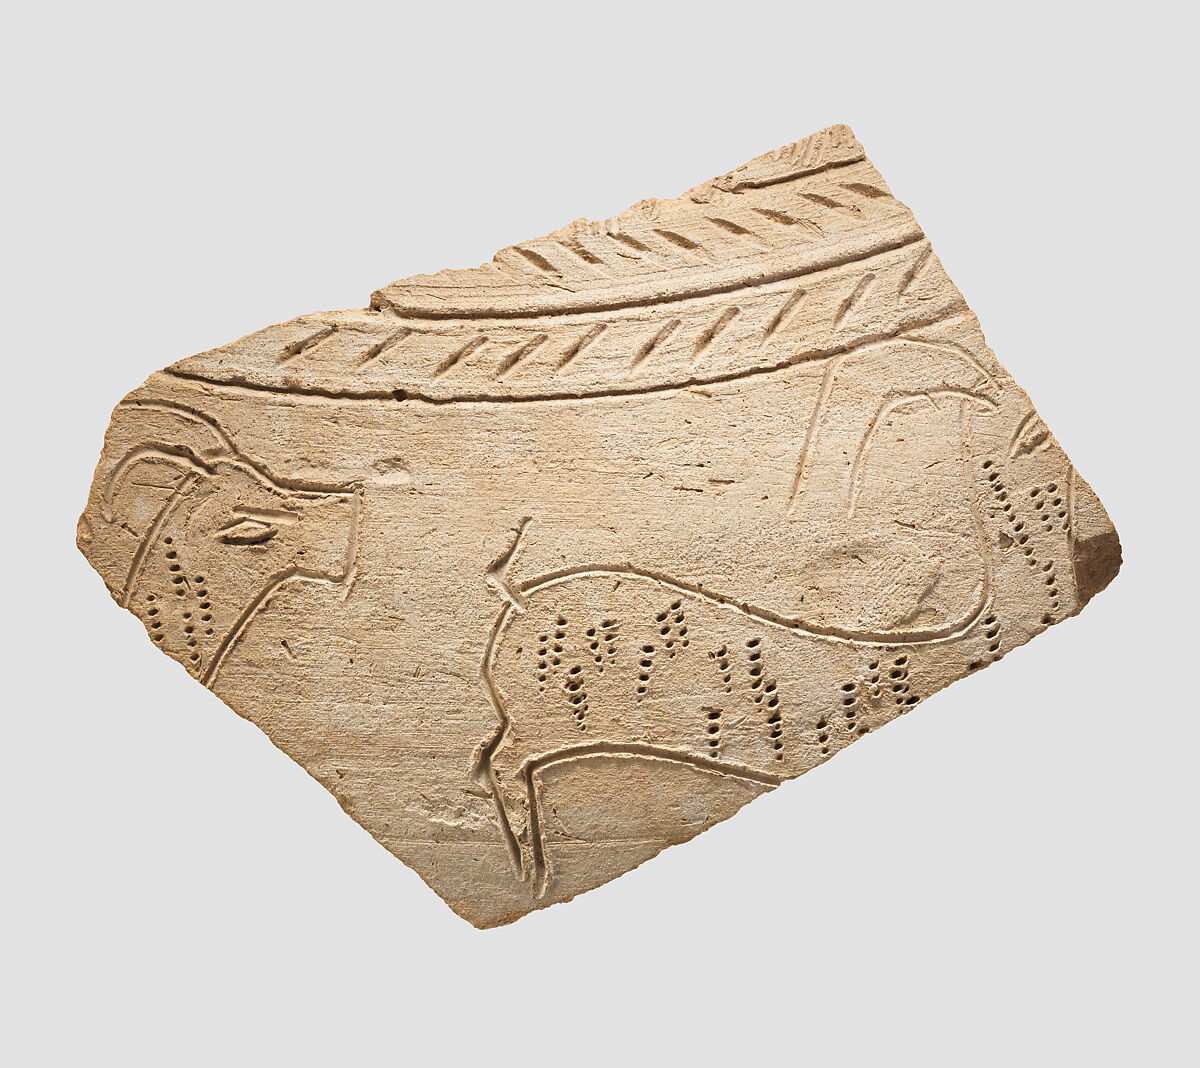 Sherd with incised decoration, Ceramic 